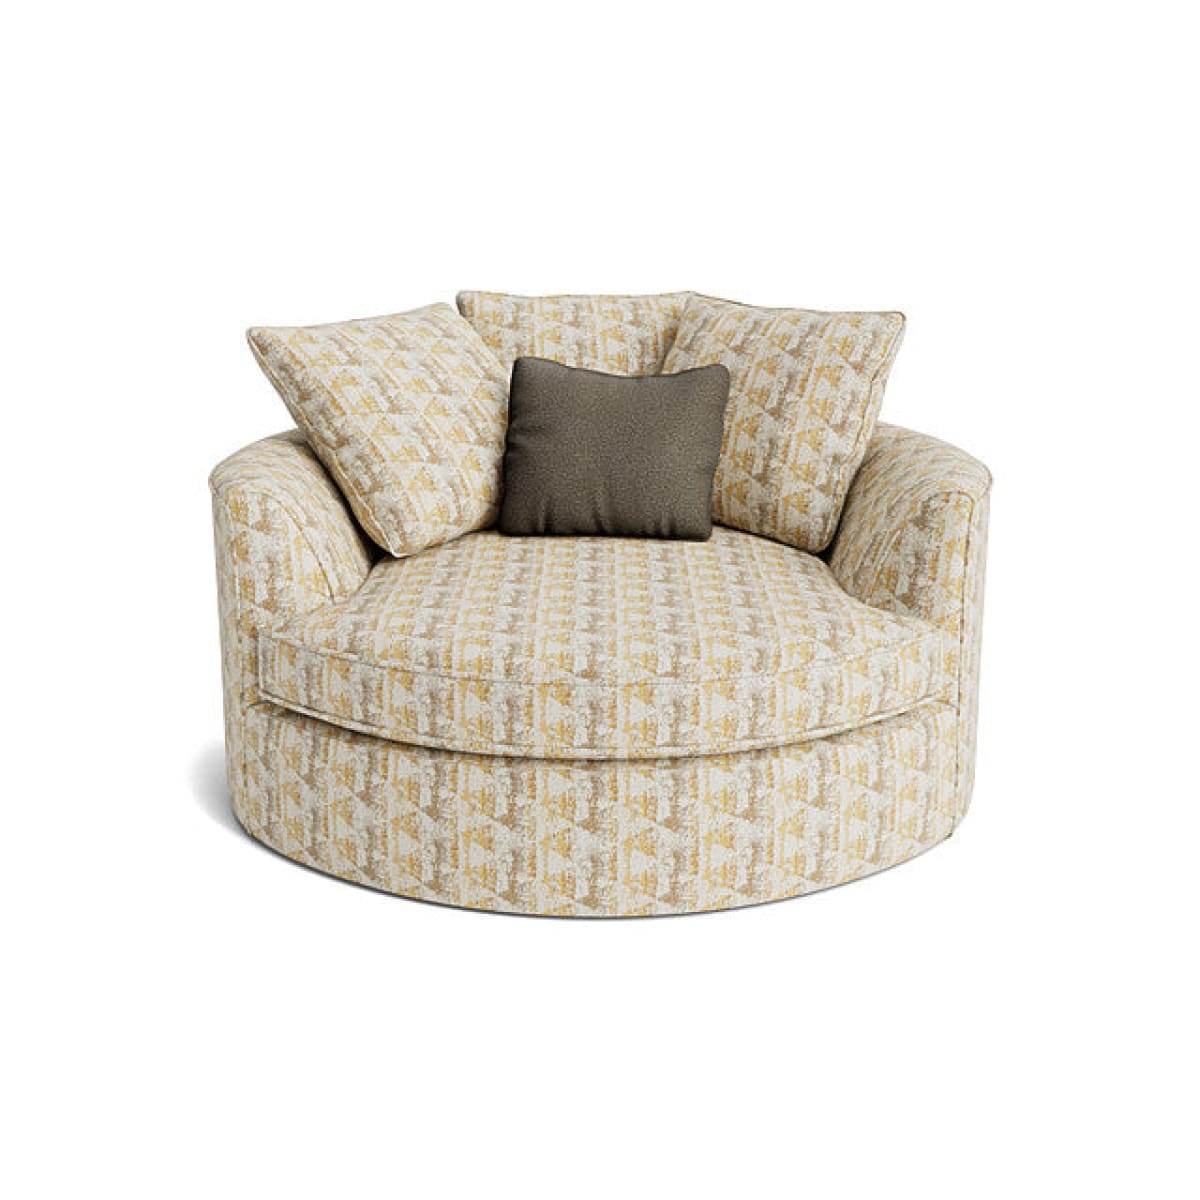 Nest Accent Chair - Voyager Buttercup